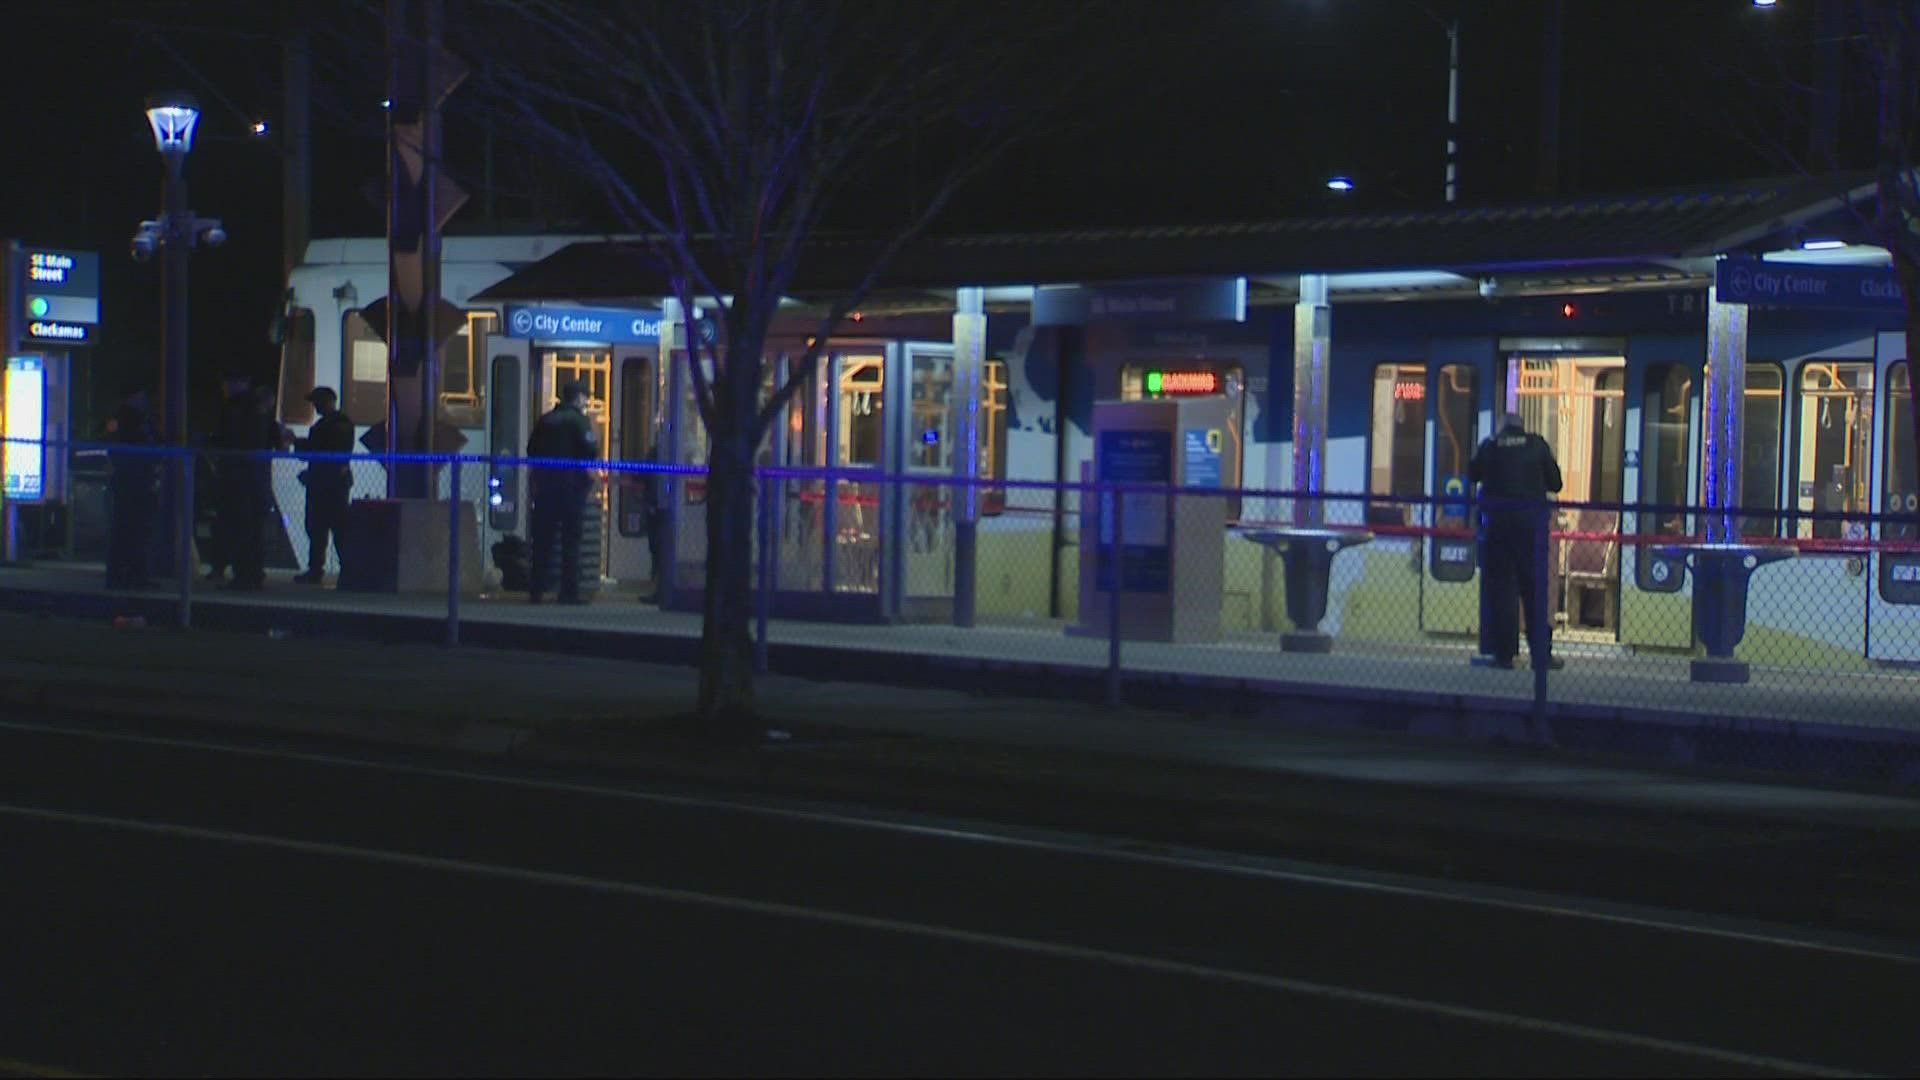 A TriMet spokesperson said the shooting happened near the MAX station on Southeast Main Street on March 3. The victim was taken to the hospital.